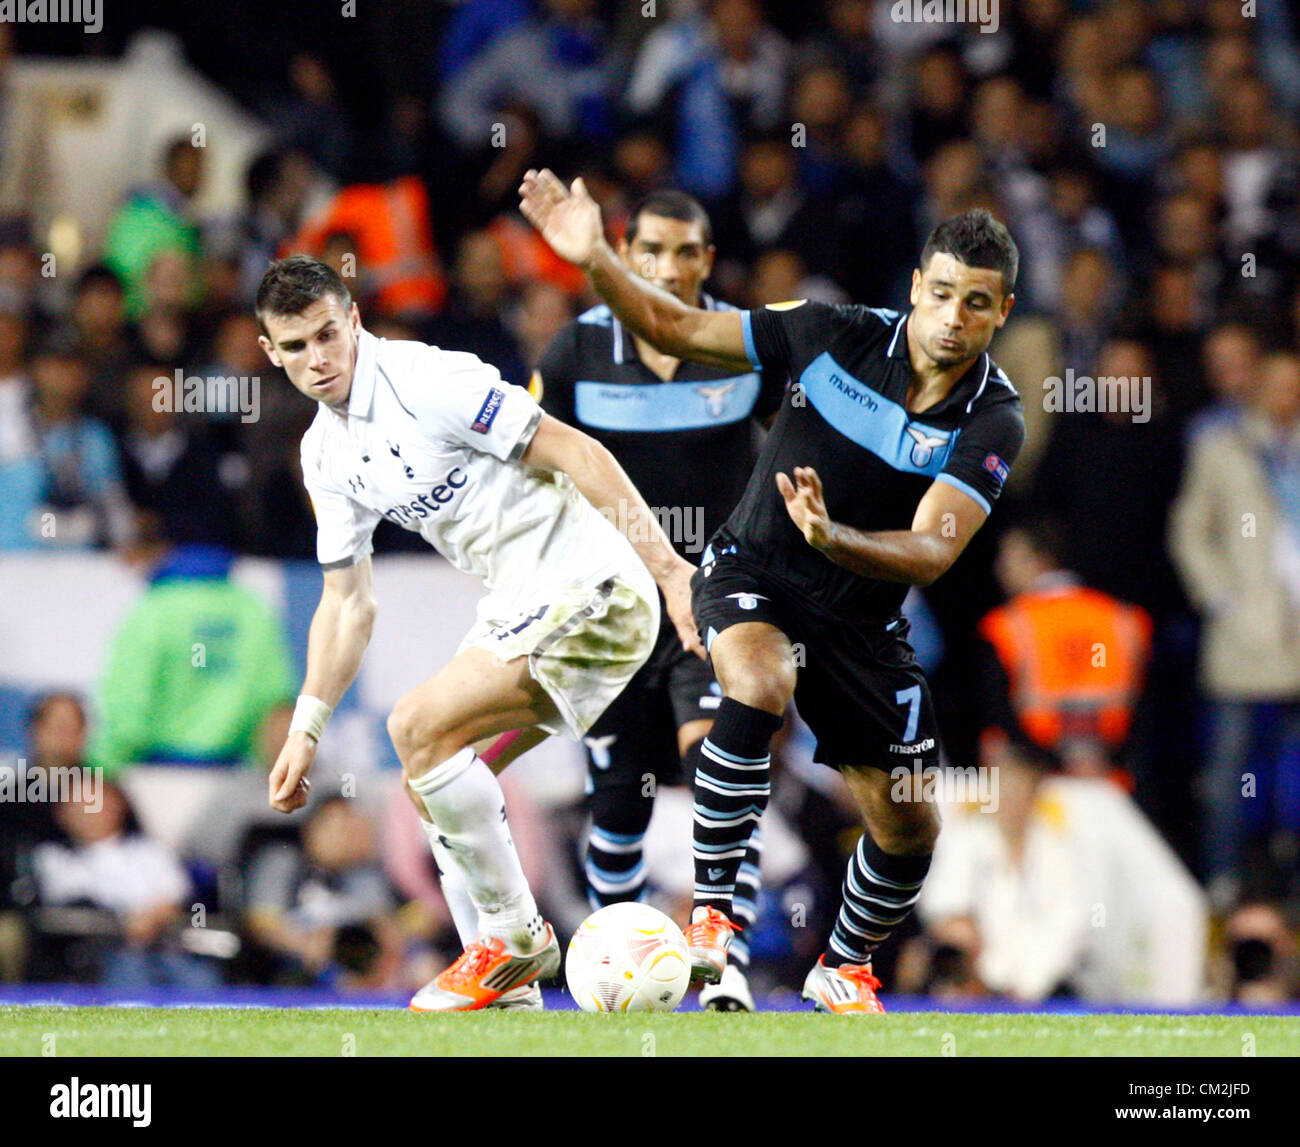 20.09.2012 London, ENGLAND:  Ederson of S.S. Lazio and Gareth Bale of Tottenham Hotspur in action during the Europa League Group J match between Tottenham Hotspur and SS Lazio at White Hart Lane Stadium Stock Photo